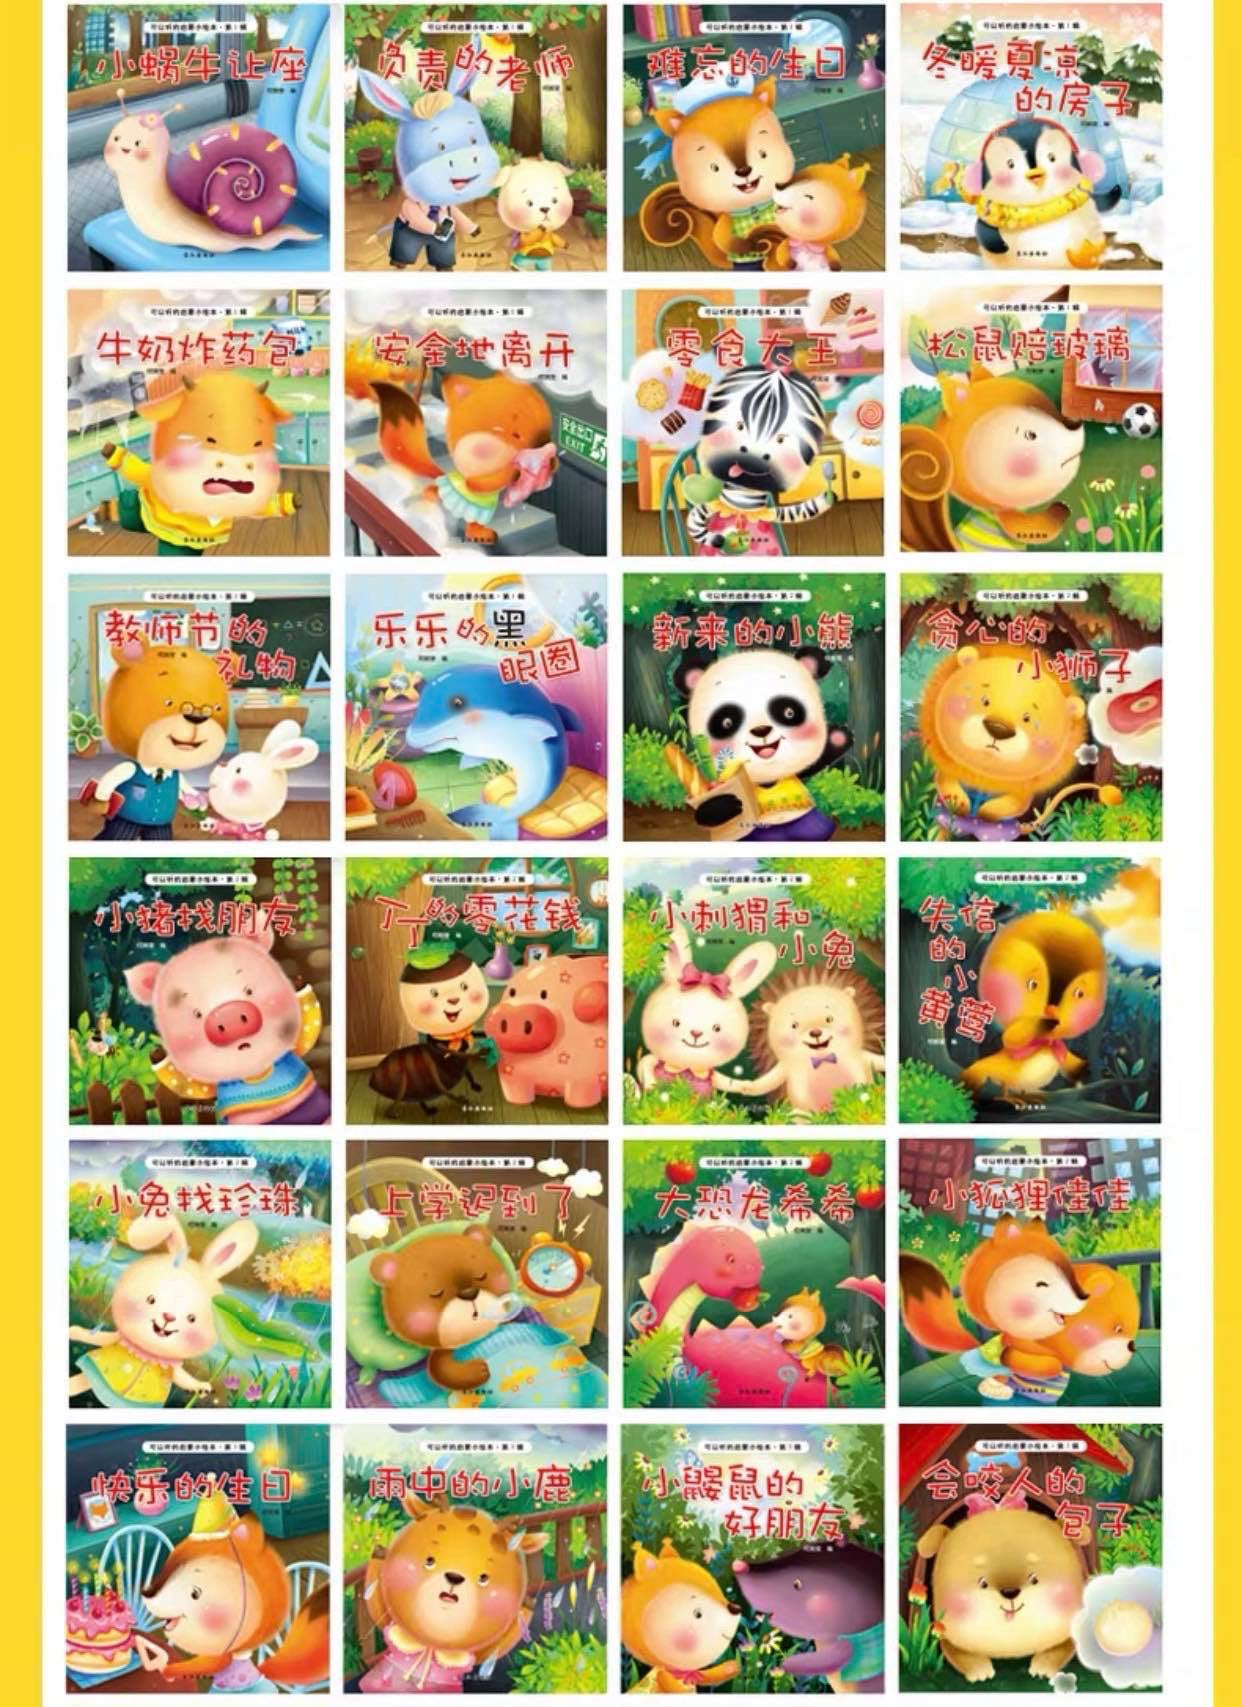 Chinese Early Learning Story Book - 100 Books